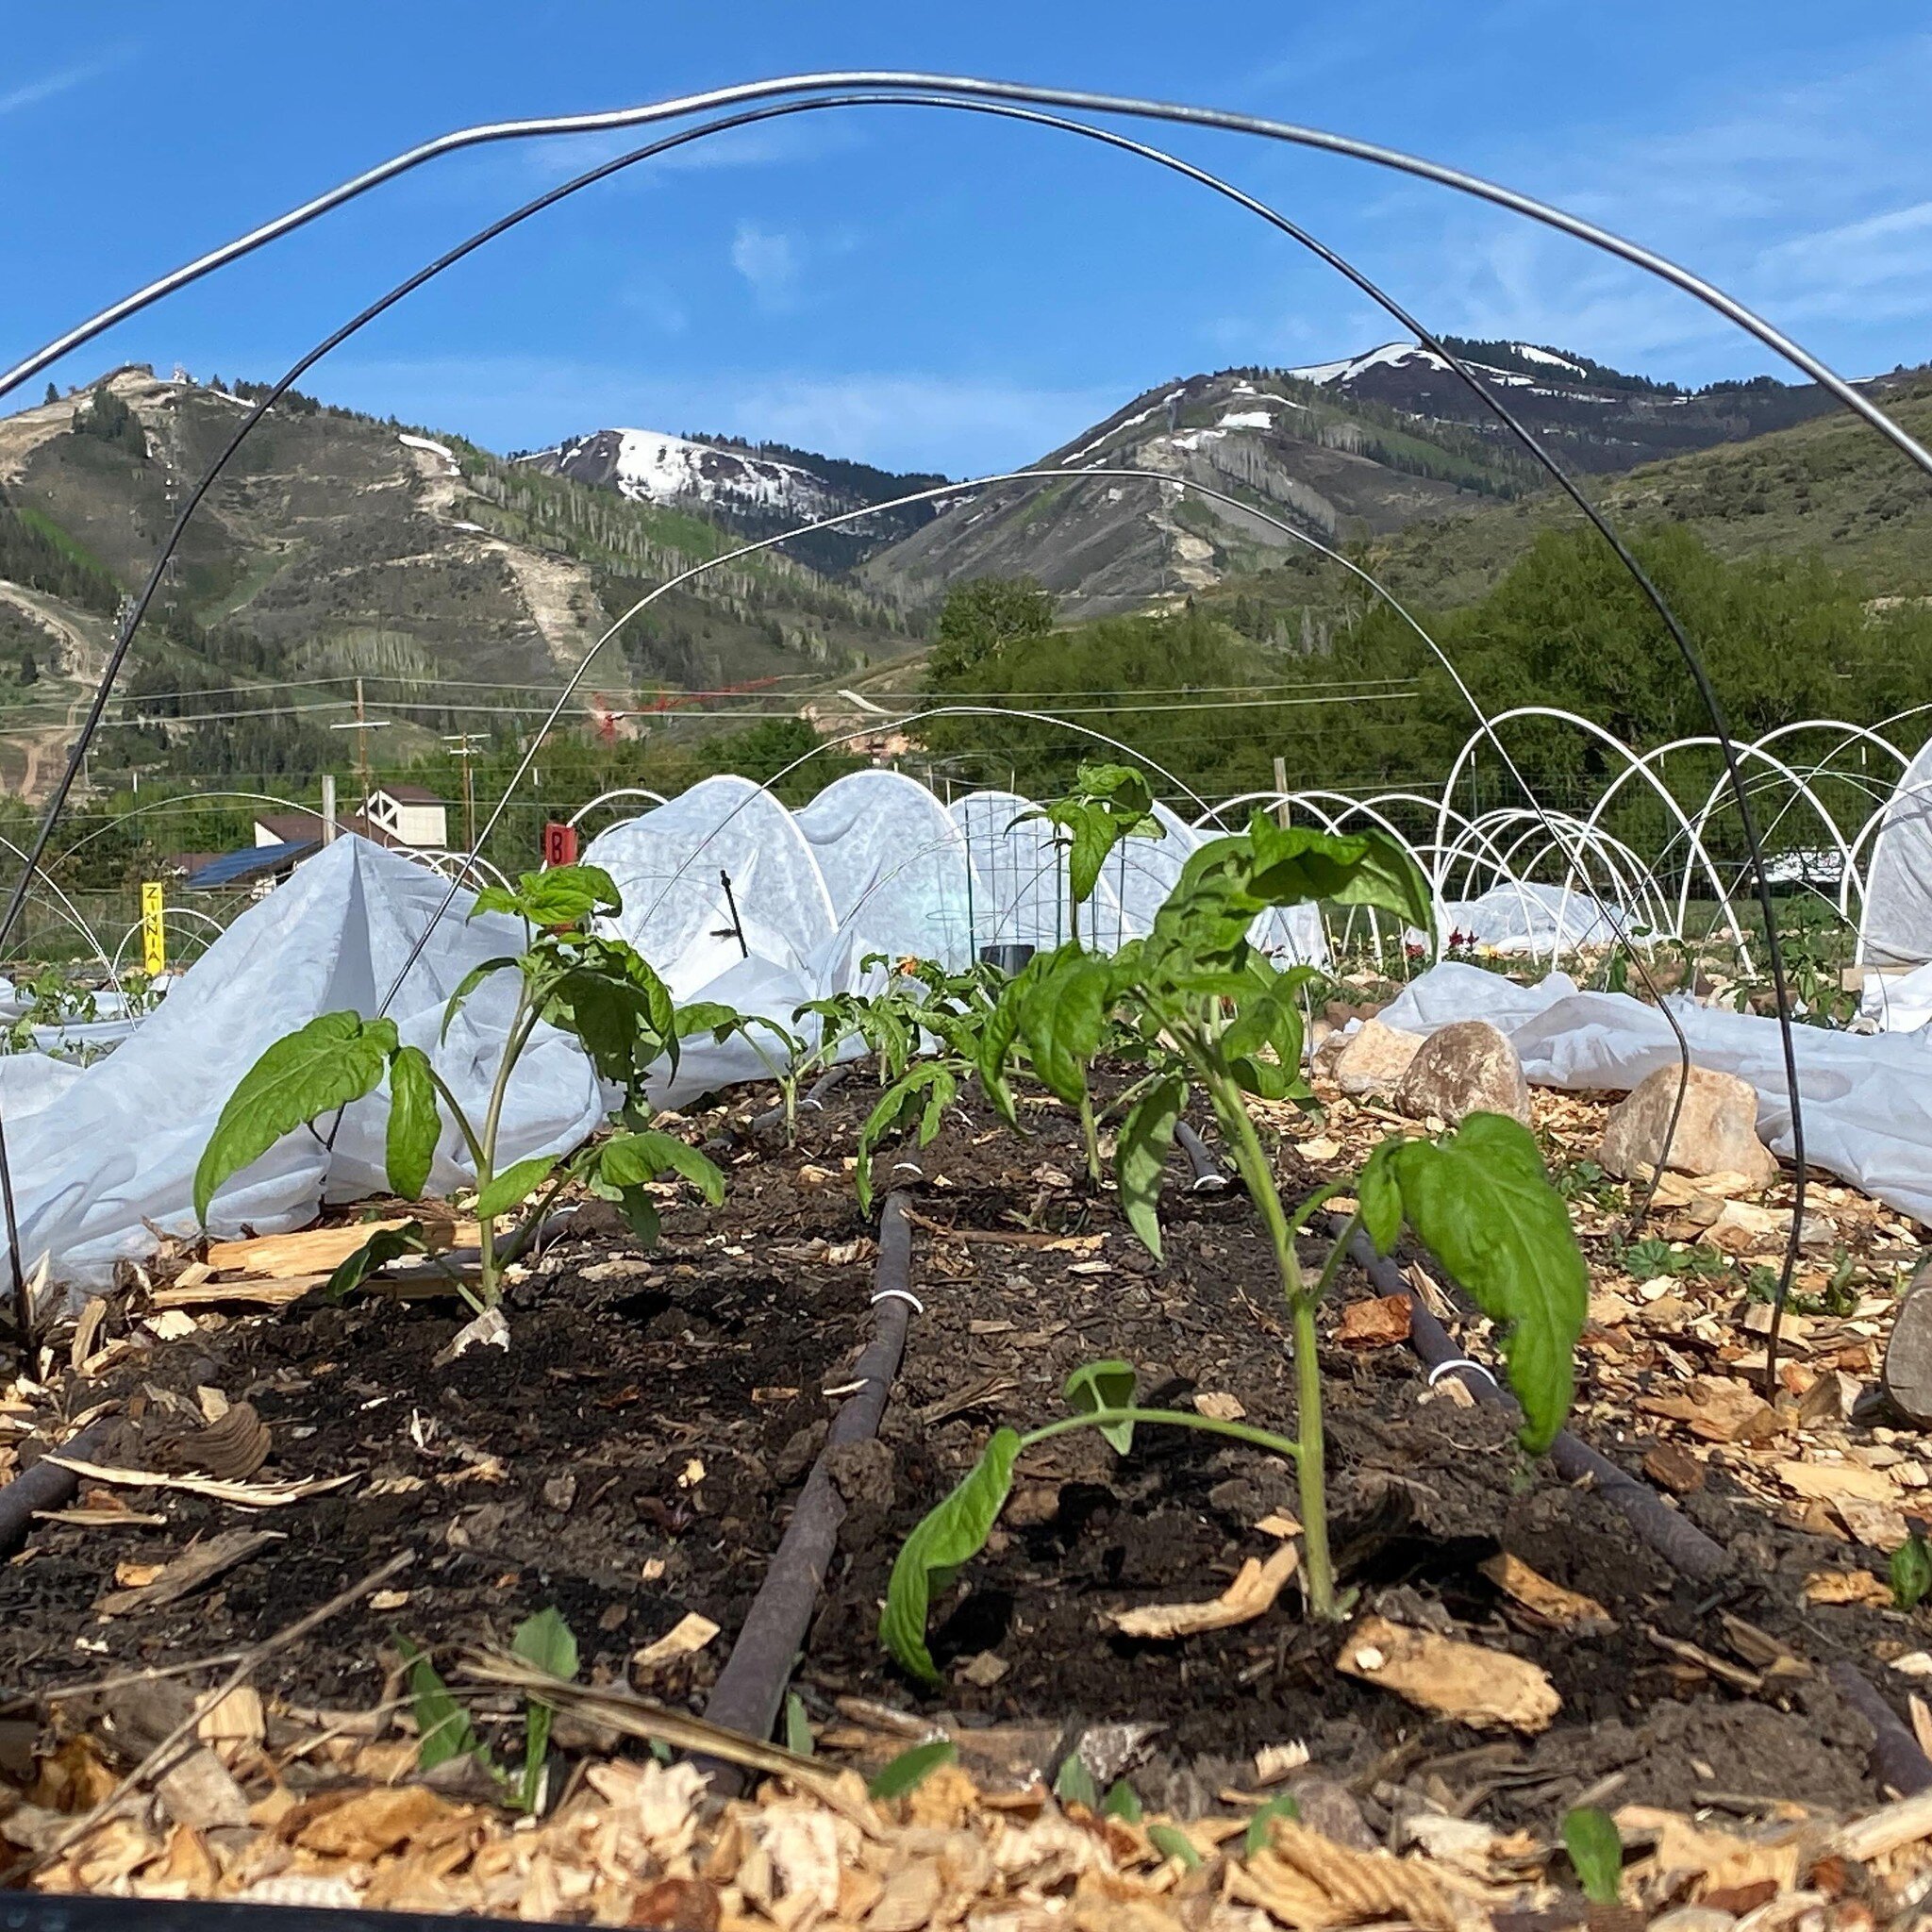 Our High Altitude Gardening 101 &amp; Garden Planning class is just over one week away! Join us virtually to learn all about growing at high altitude and best steps for effective garden planning to get the highest yields of what you grow. Sign up via